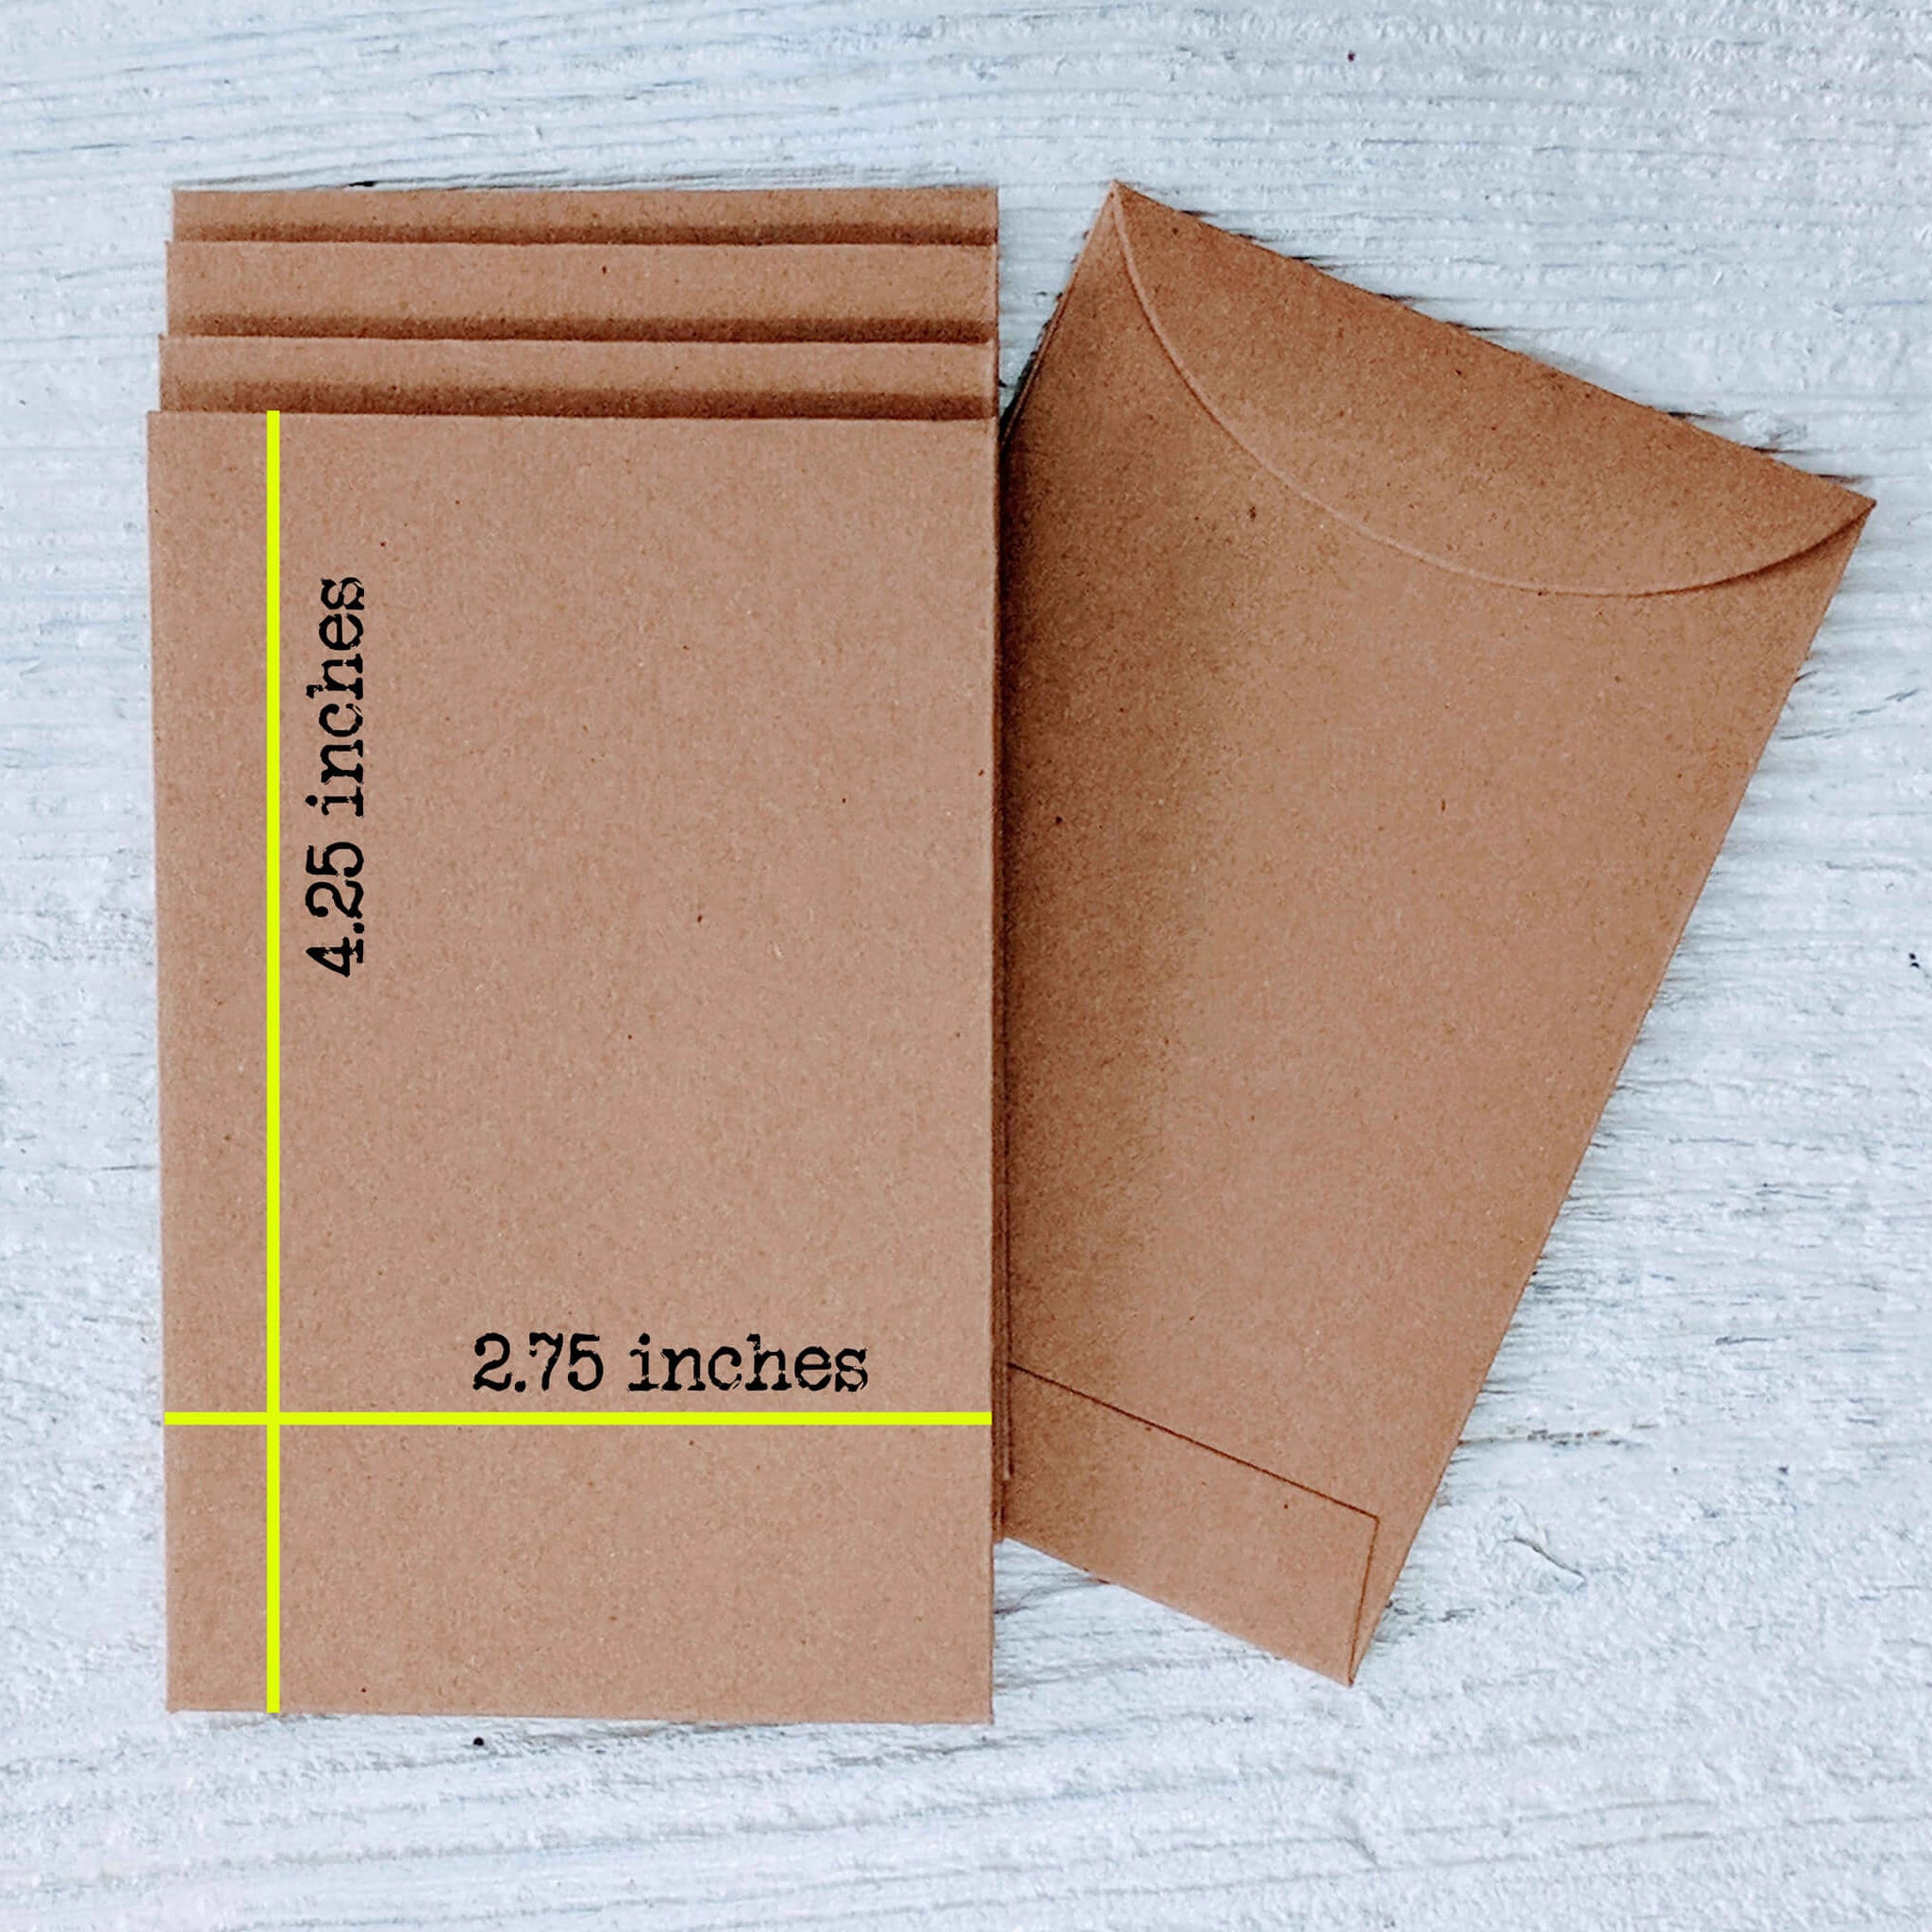 100 PCS Glassine Envelopes Seed Envelopes Coin Envelopes Clear Envelopes  for Collecting Lottery Ticket Stamp Card Coin Gift Wedding (2.7 x 3.9 inch)